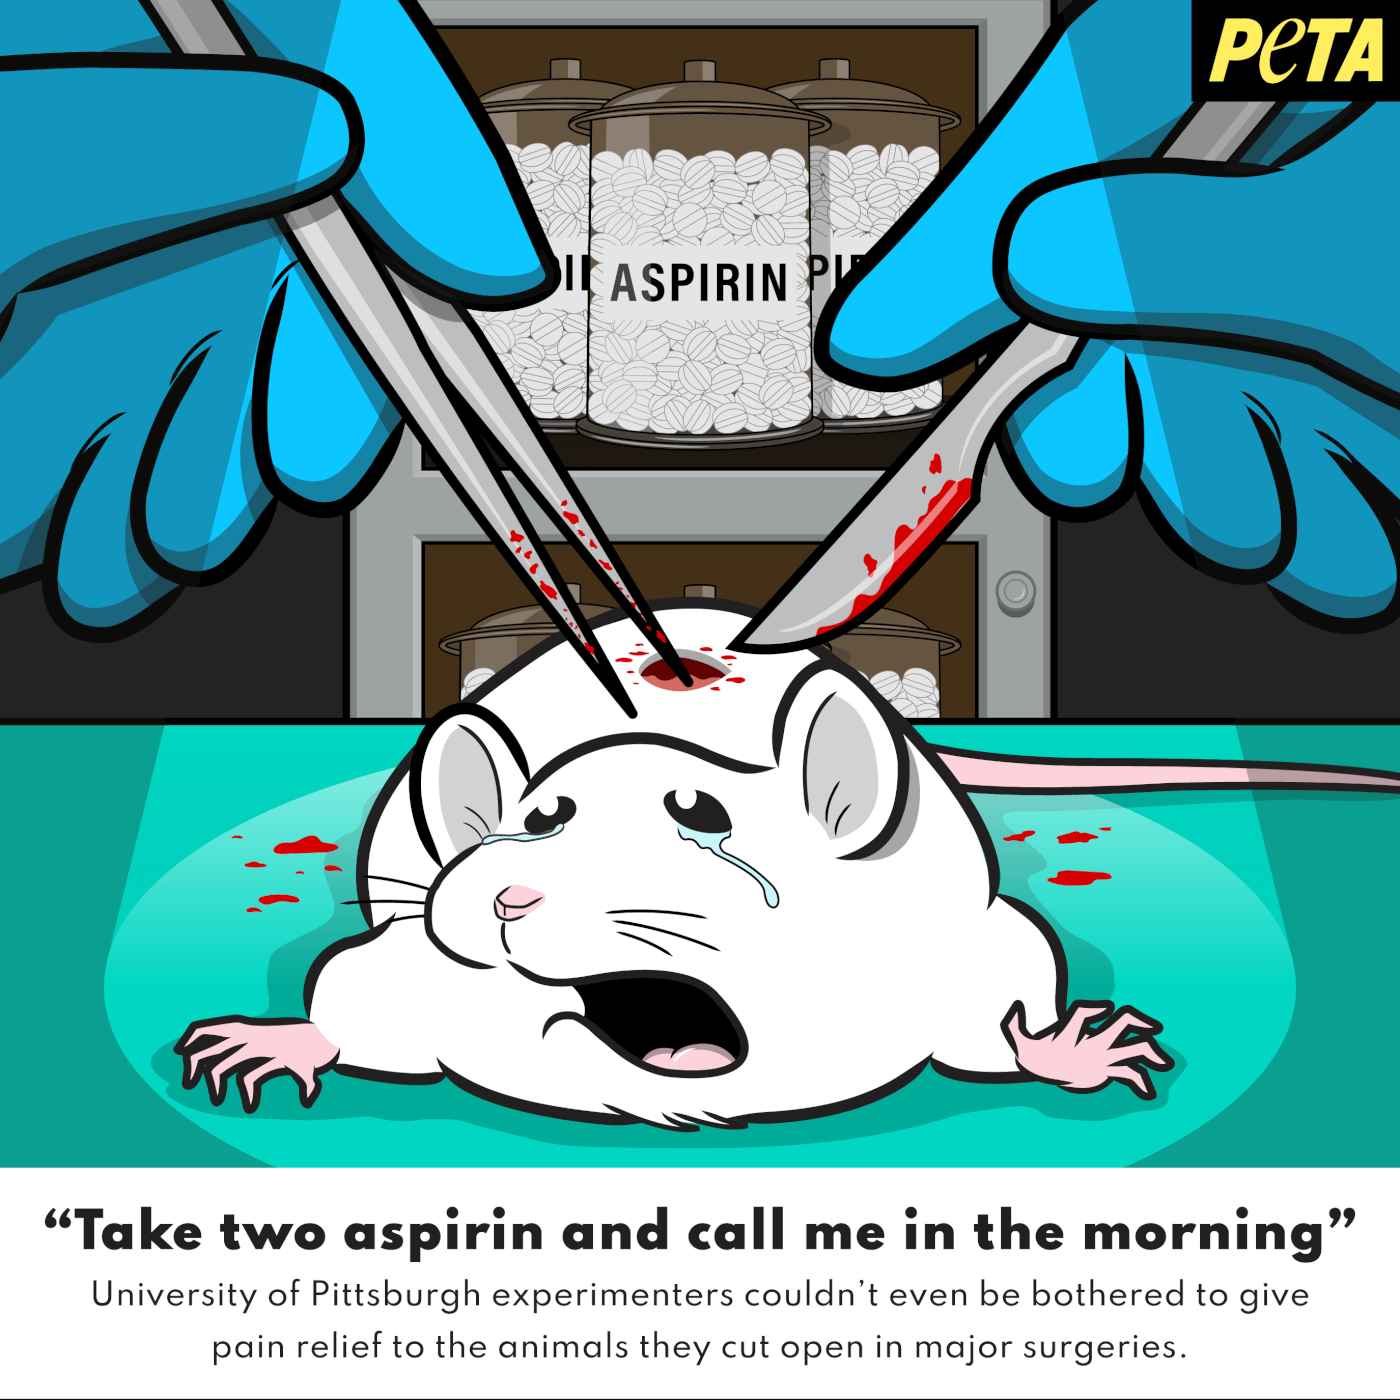 An illustration of a crying mouse being operated on by gloved hands, and text reading "Take to aspirin and call me in the morning": University of Pittsburgh experimenters couldn't even be bothered to give pain relief ot the animals they cut open in major surgeries.